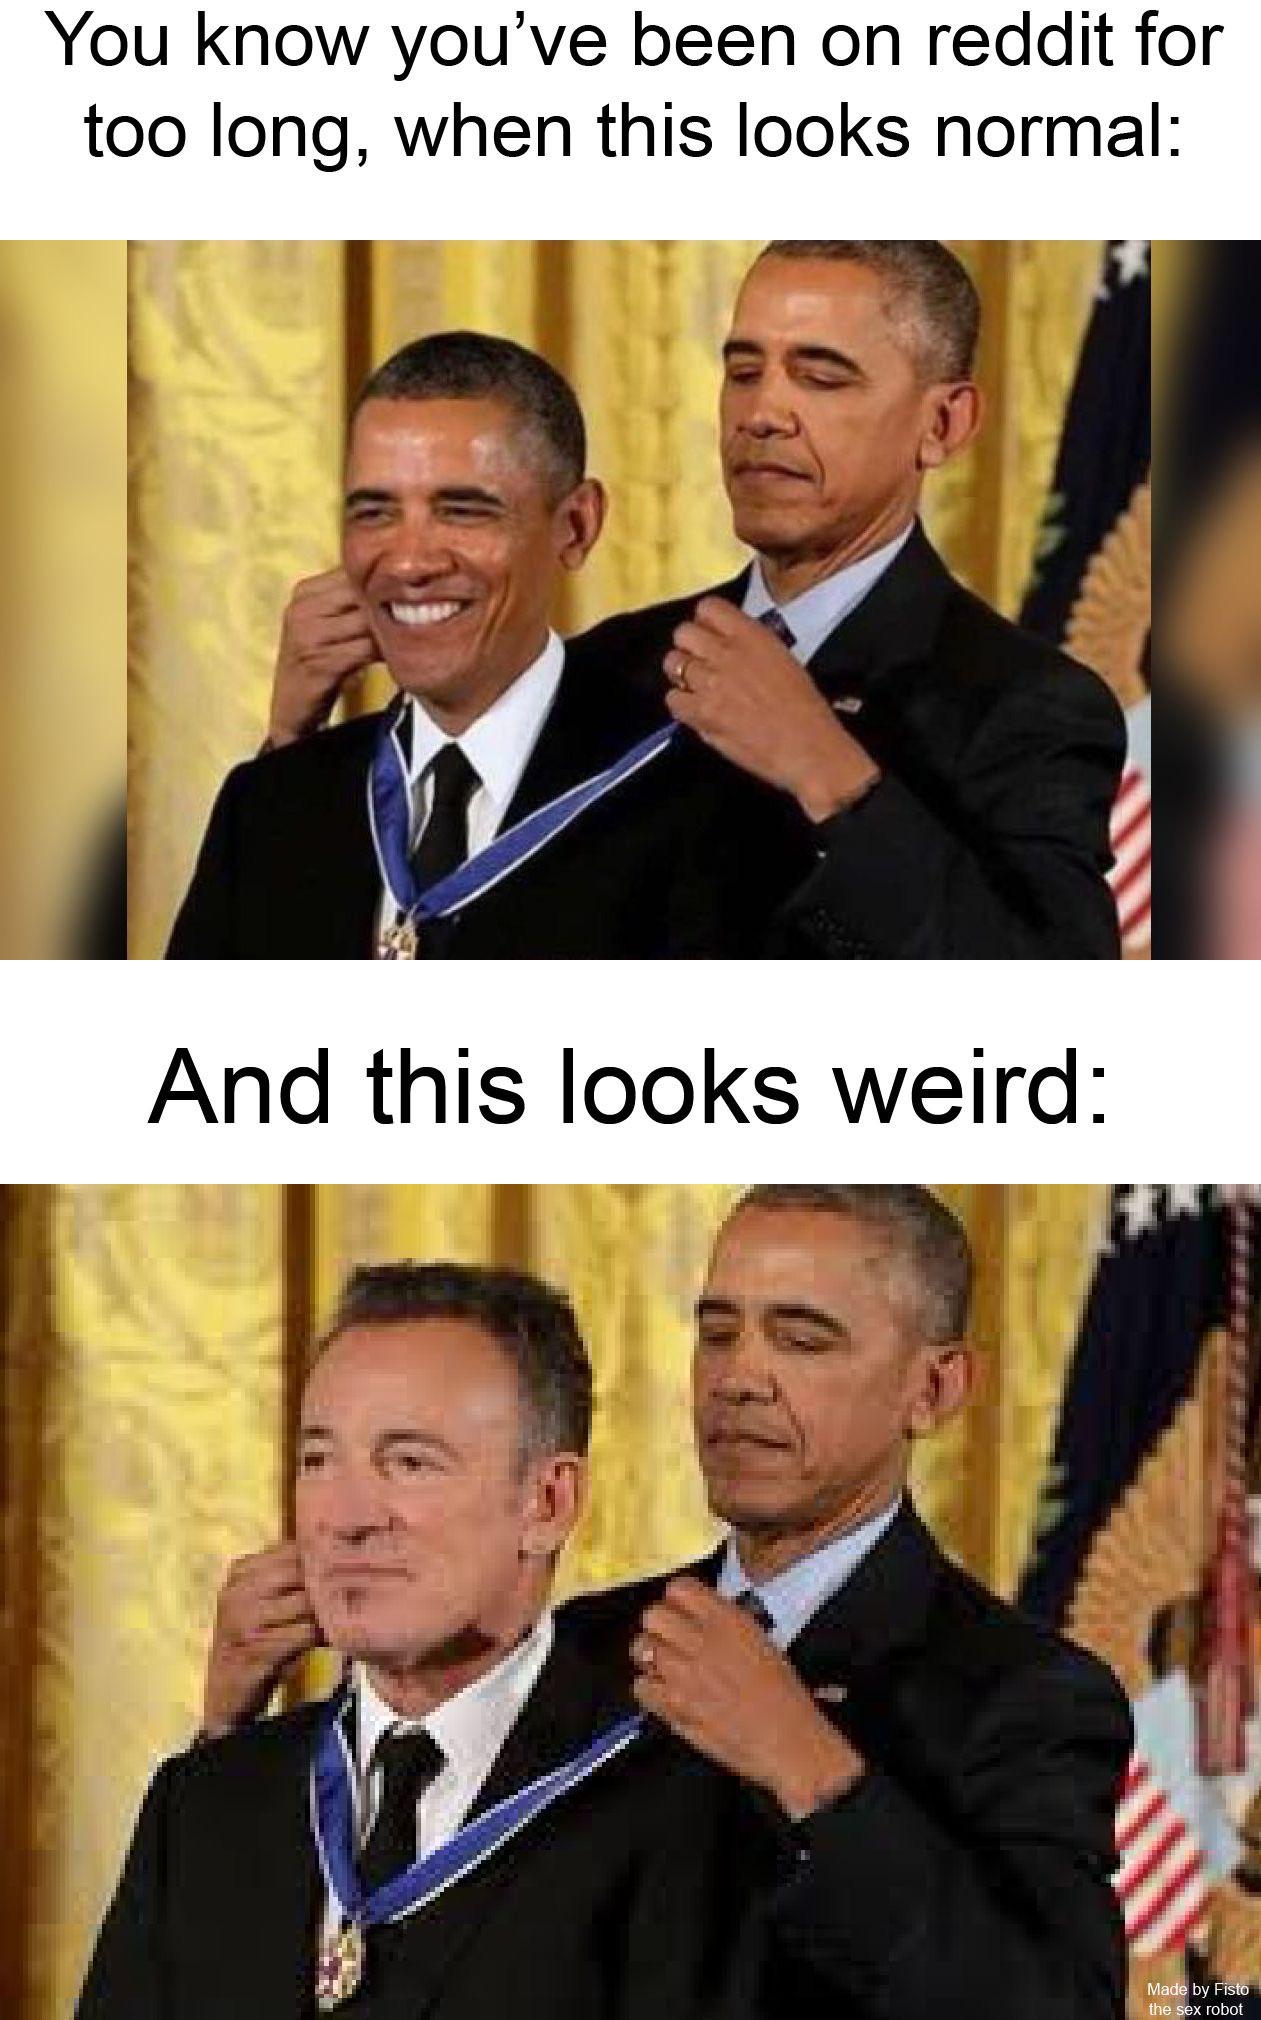 Funny, Springsteen, Reddit, The Boss, Bruce, USA other memes Funny, Springsteen, Reddit, The Boss, Bruce, USA text: You know you've been on reddit for too long, when this looks normal: And this looks weird: M the by x robot 